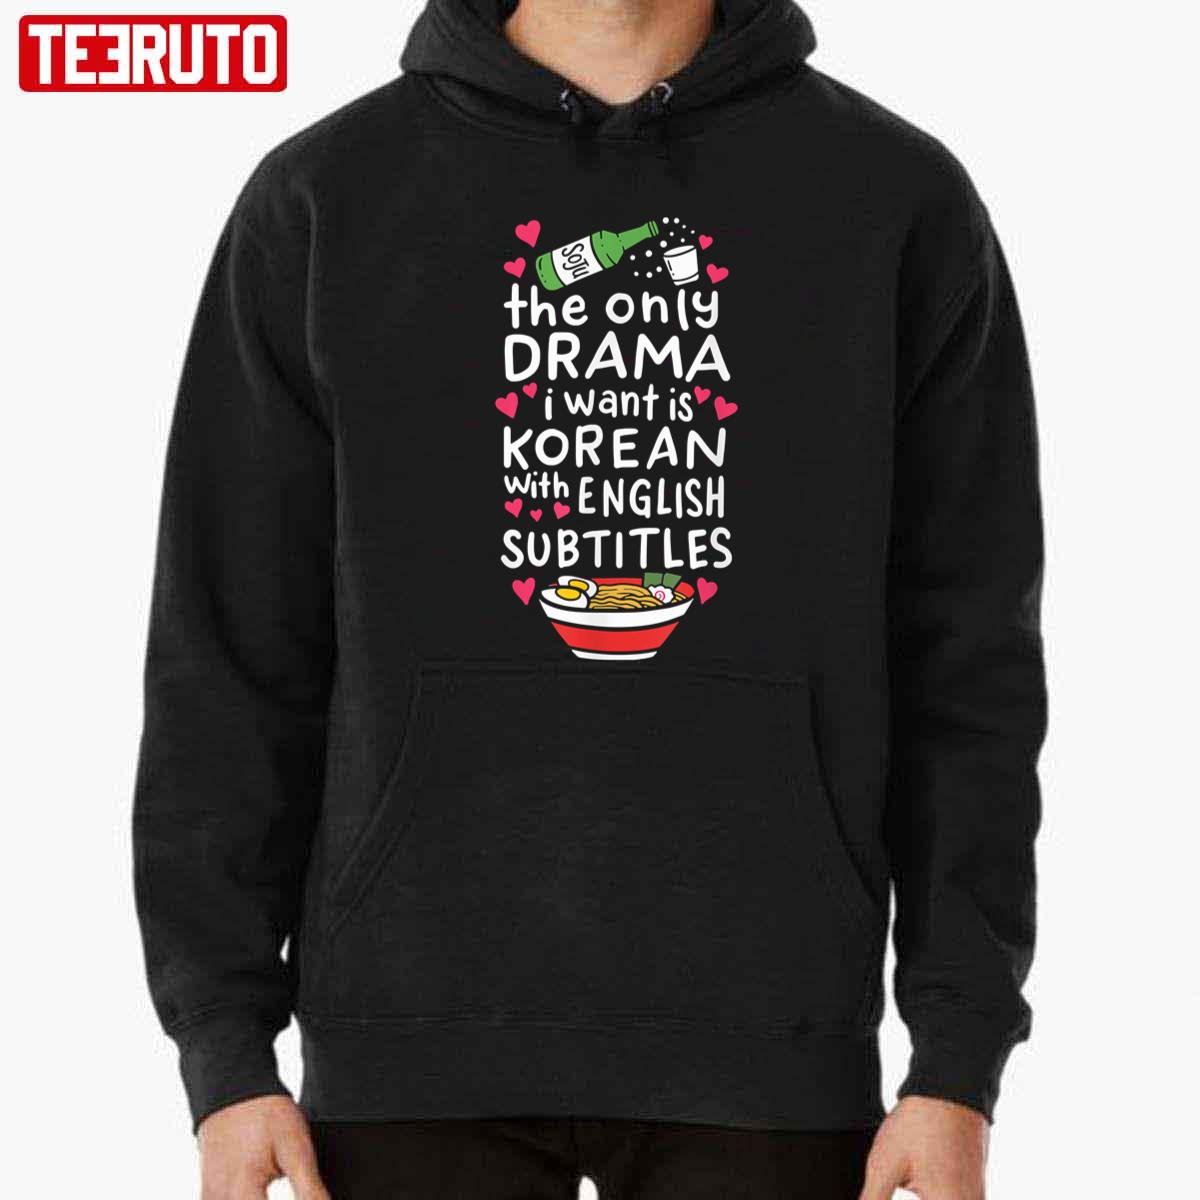 The Only Drama I Want Is Korean With English Subtitles Funny Quote Unisex  T-Shirt - Teeruto